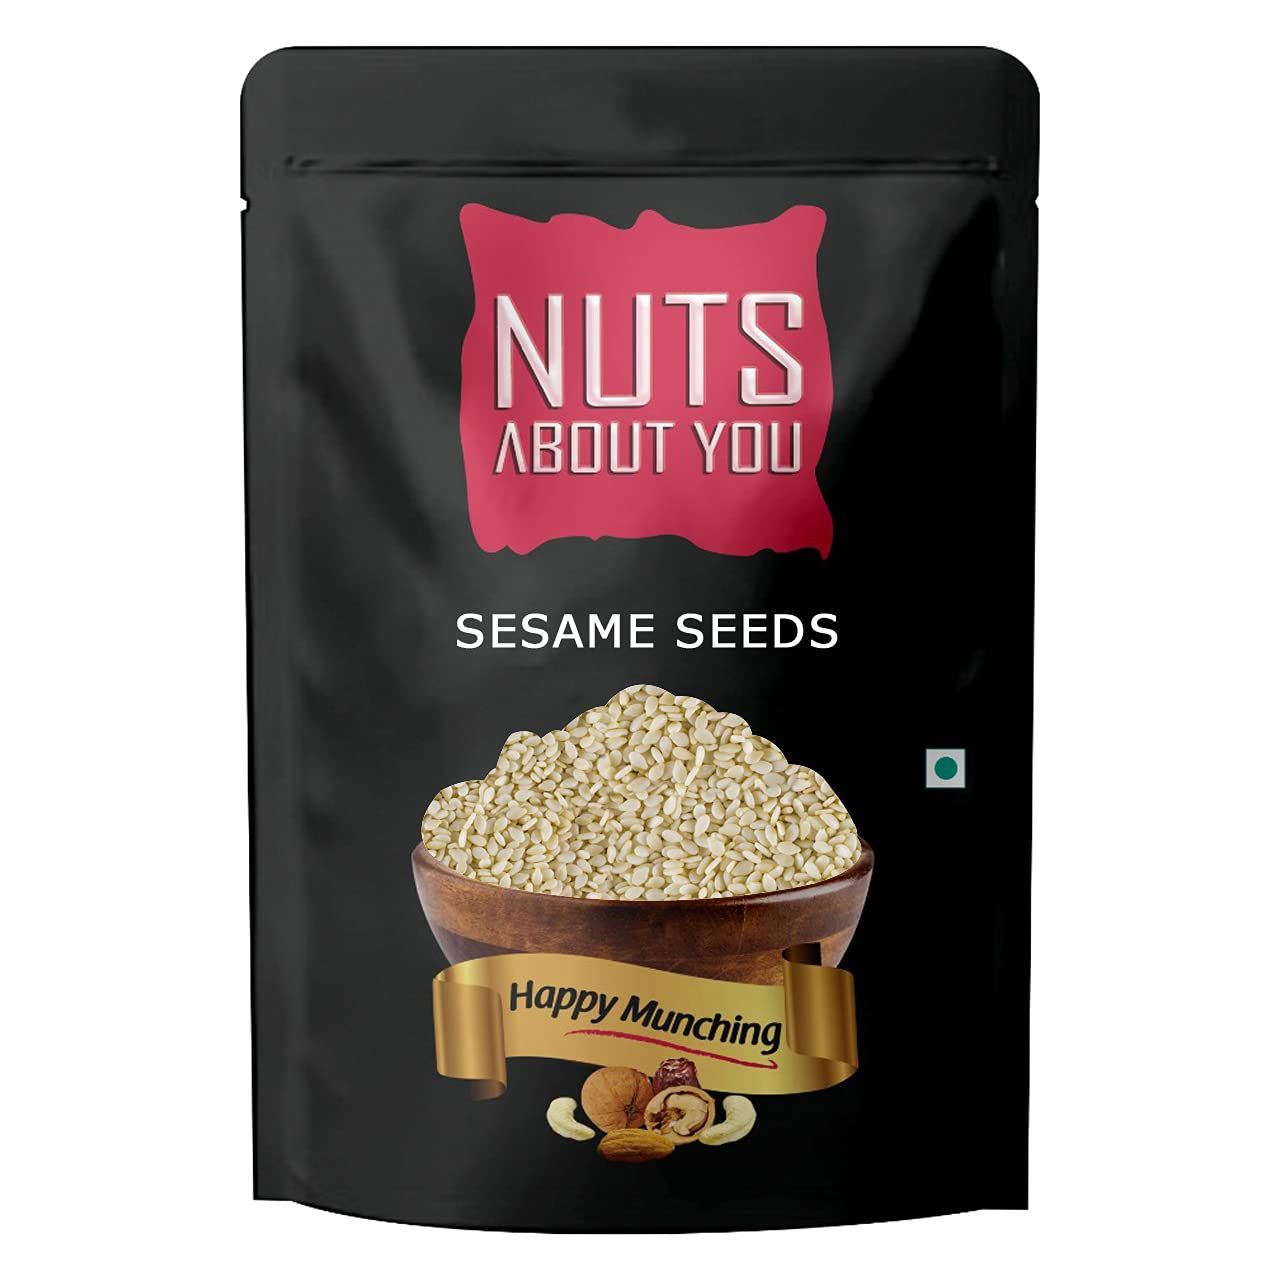 Nuts About You Sesame Seeds Image